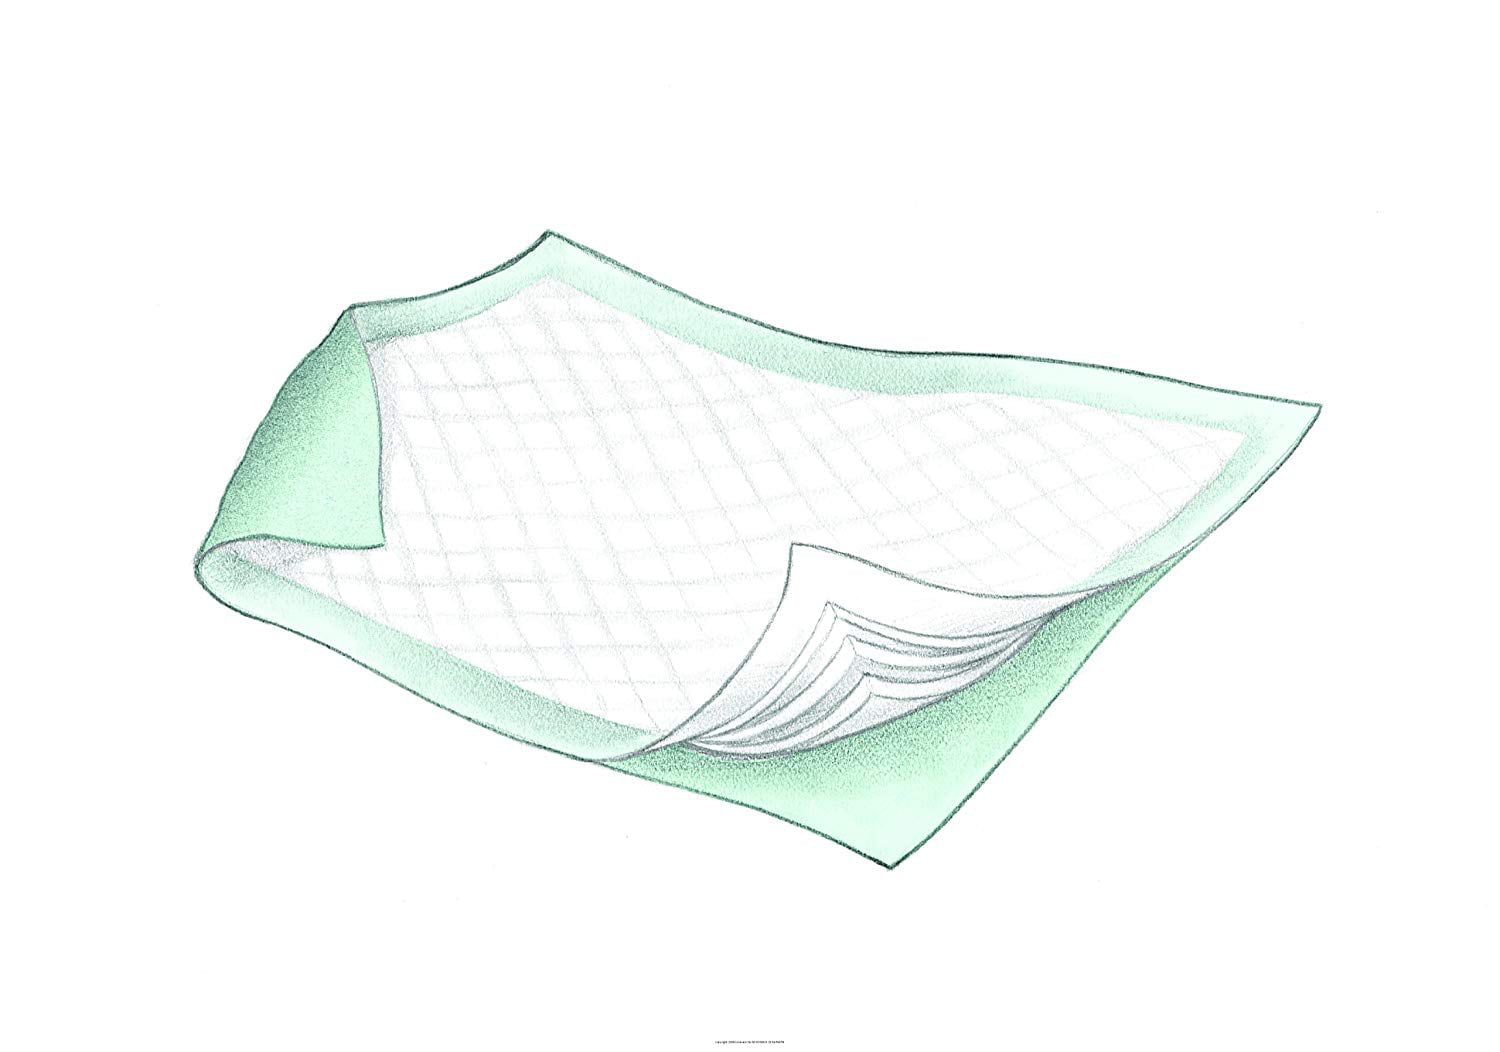 Maxi Care Underpad, Maxicare Undrpd 30X36 in, (1 CASE, 50 EACH)- KatyMedSolutions